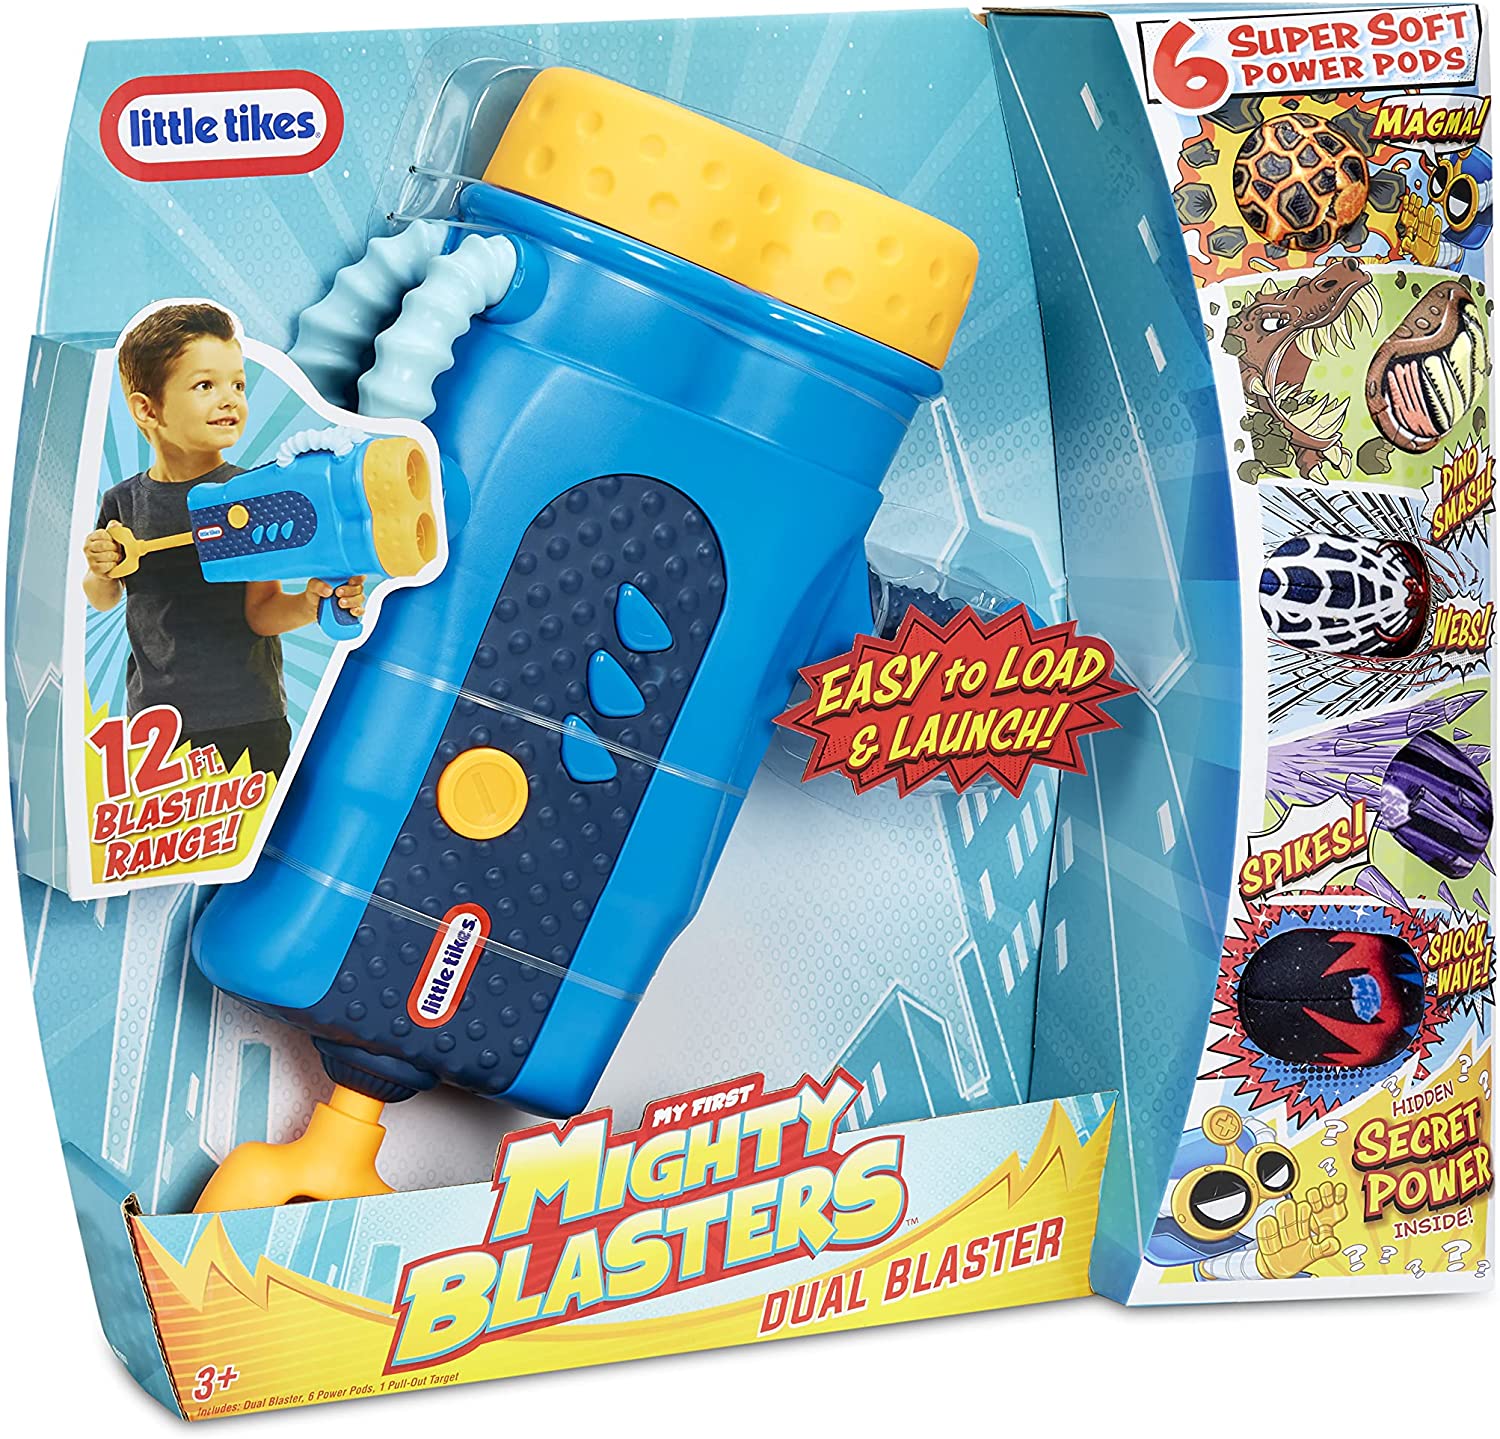 My 1st Mighty Duel Blaster